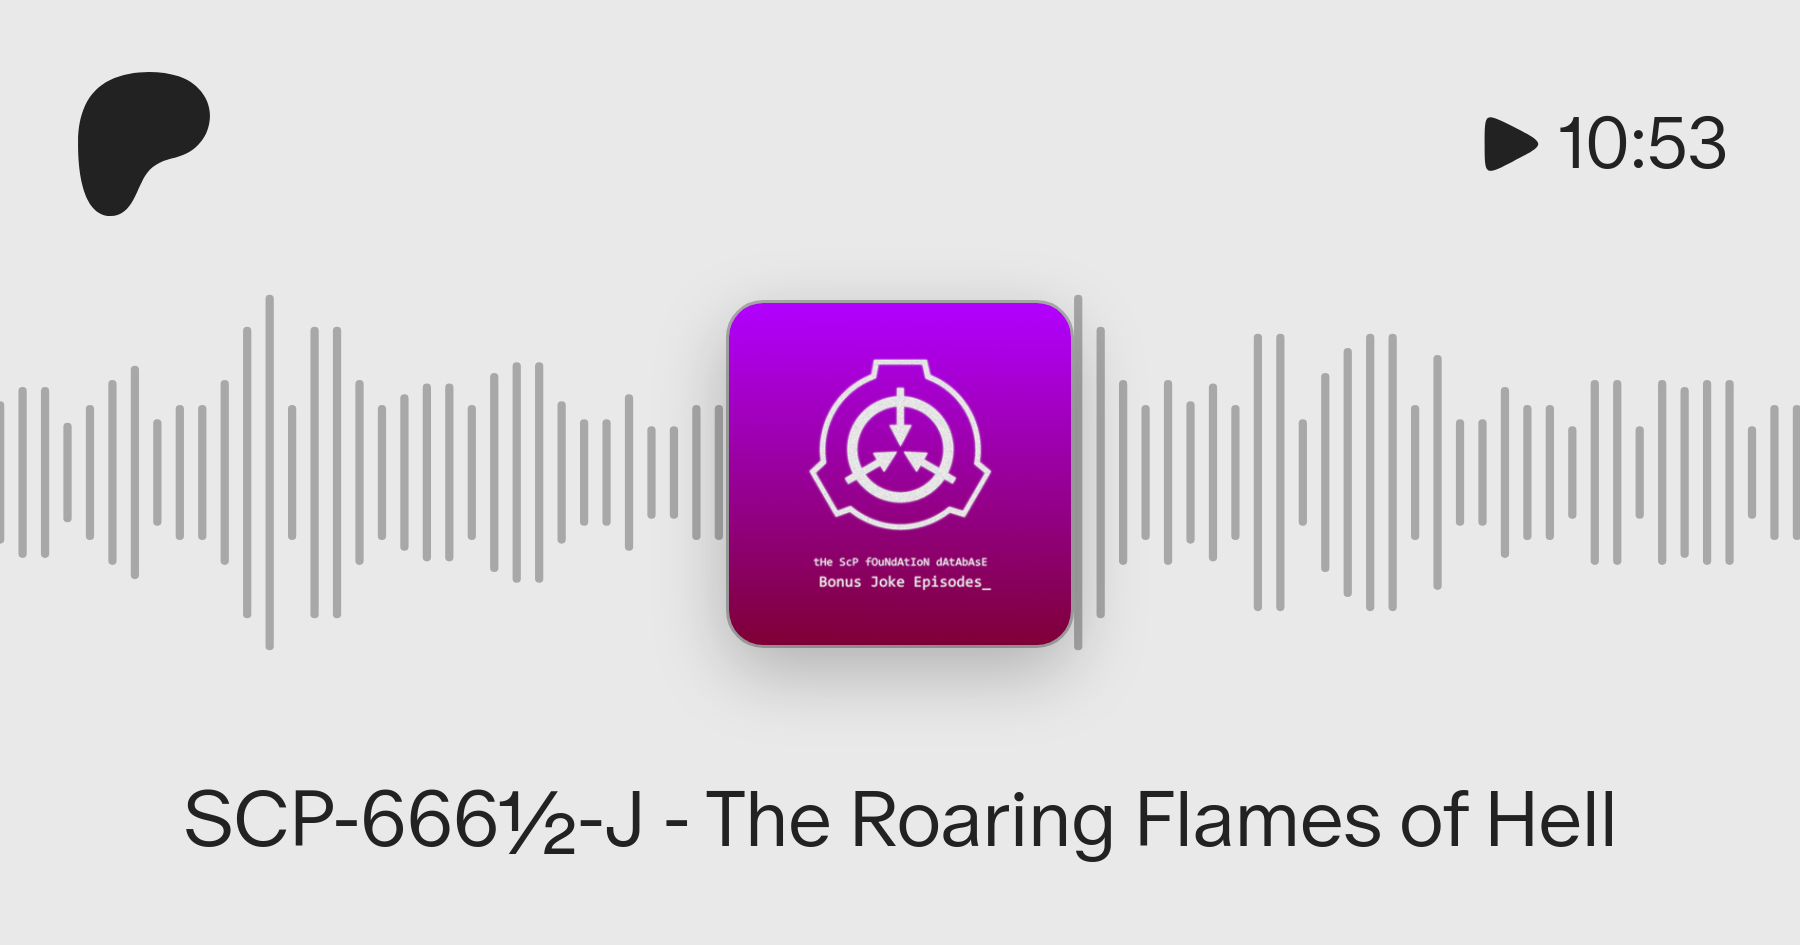 SCP-666-½-J The Roaring Flames of Hell